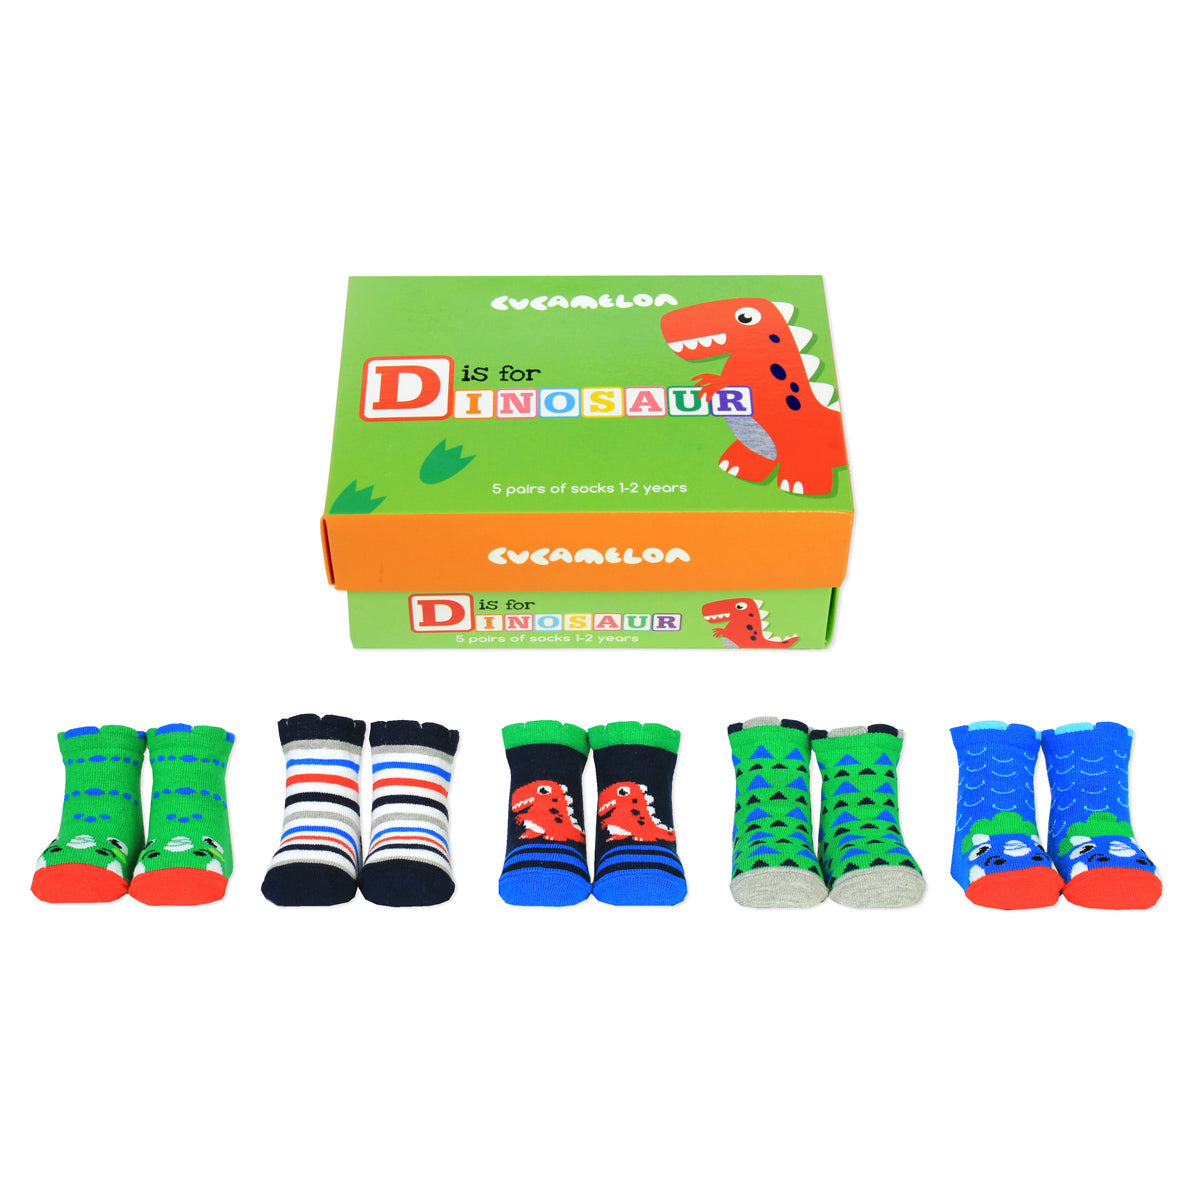 Socks for 1 to 2 years - Dippy The Dinosaur